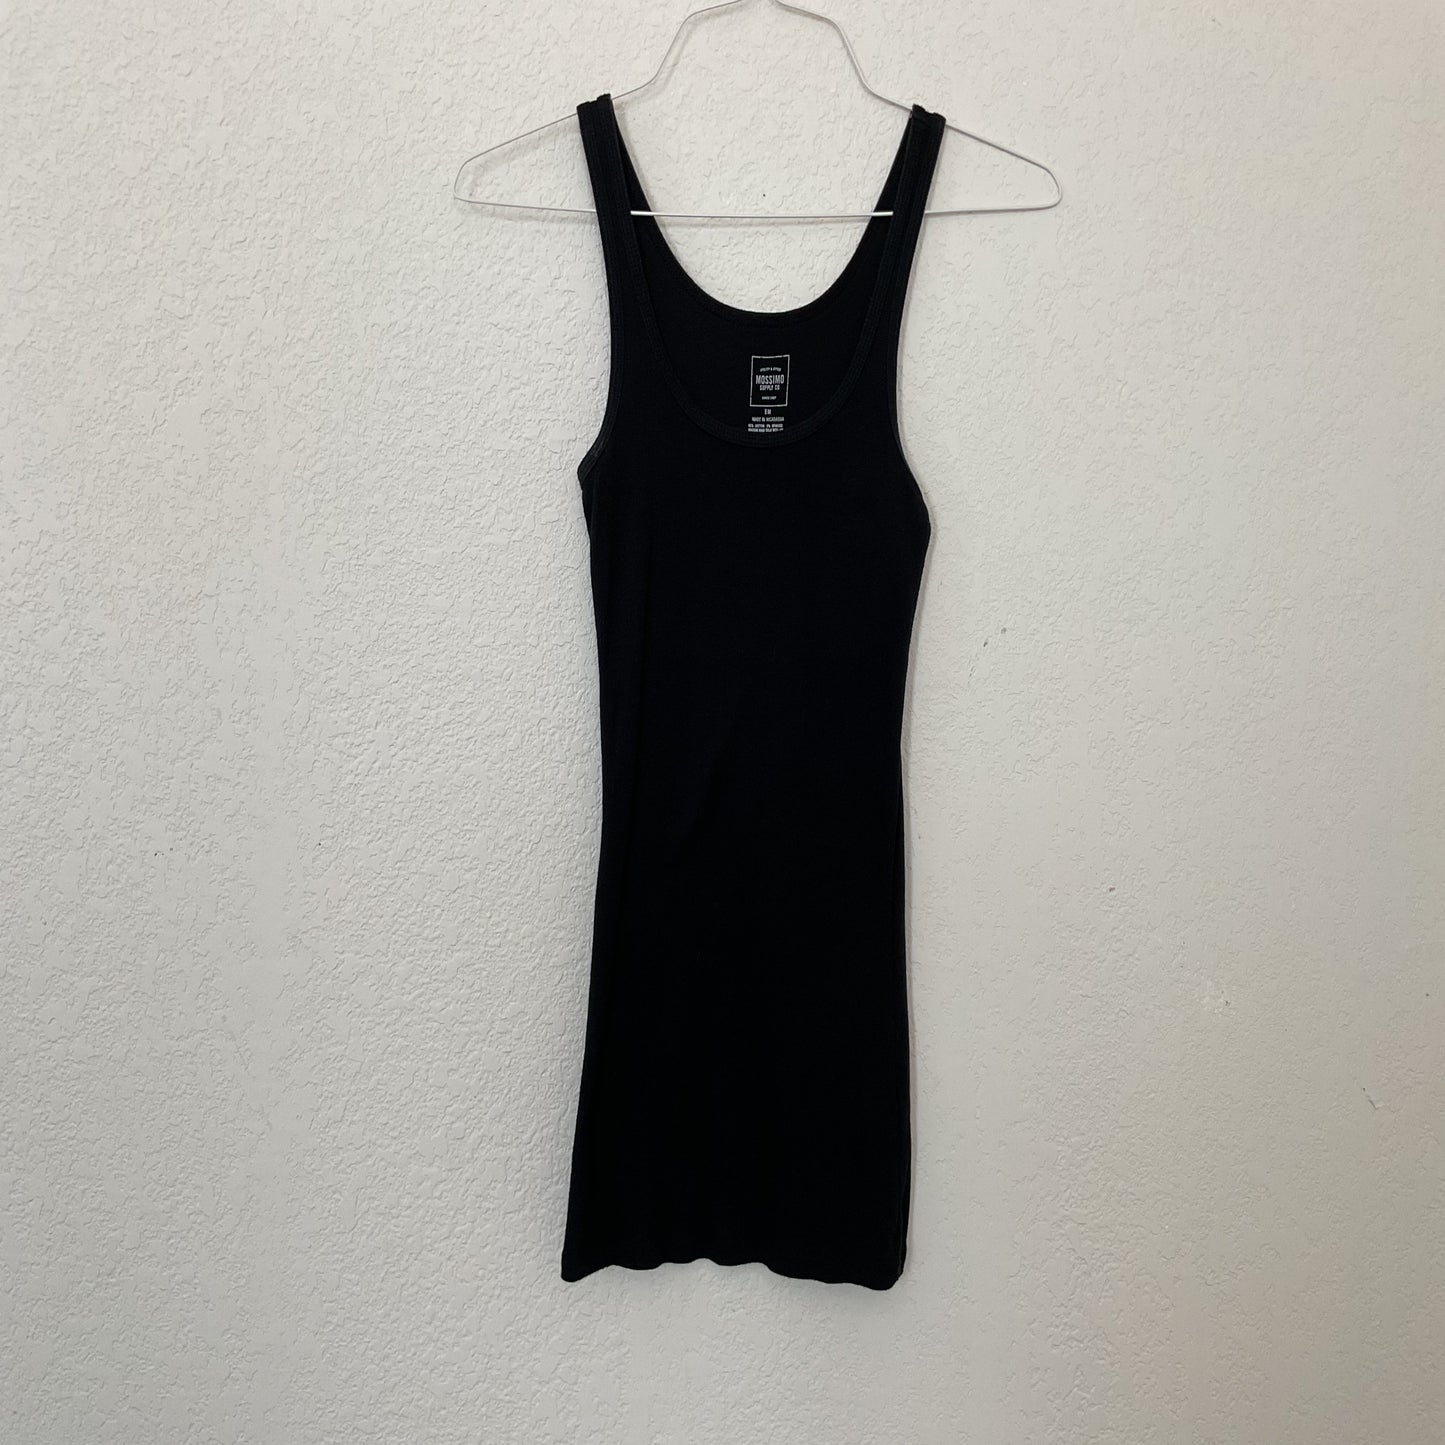 Mossimo Supply Co. Women’s Tank Top Size M.